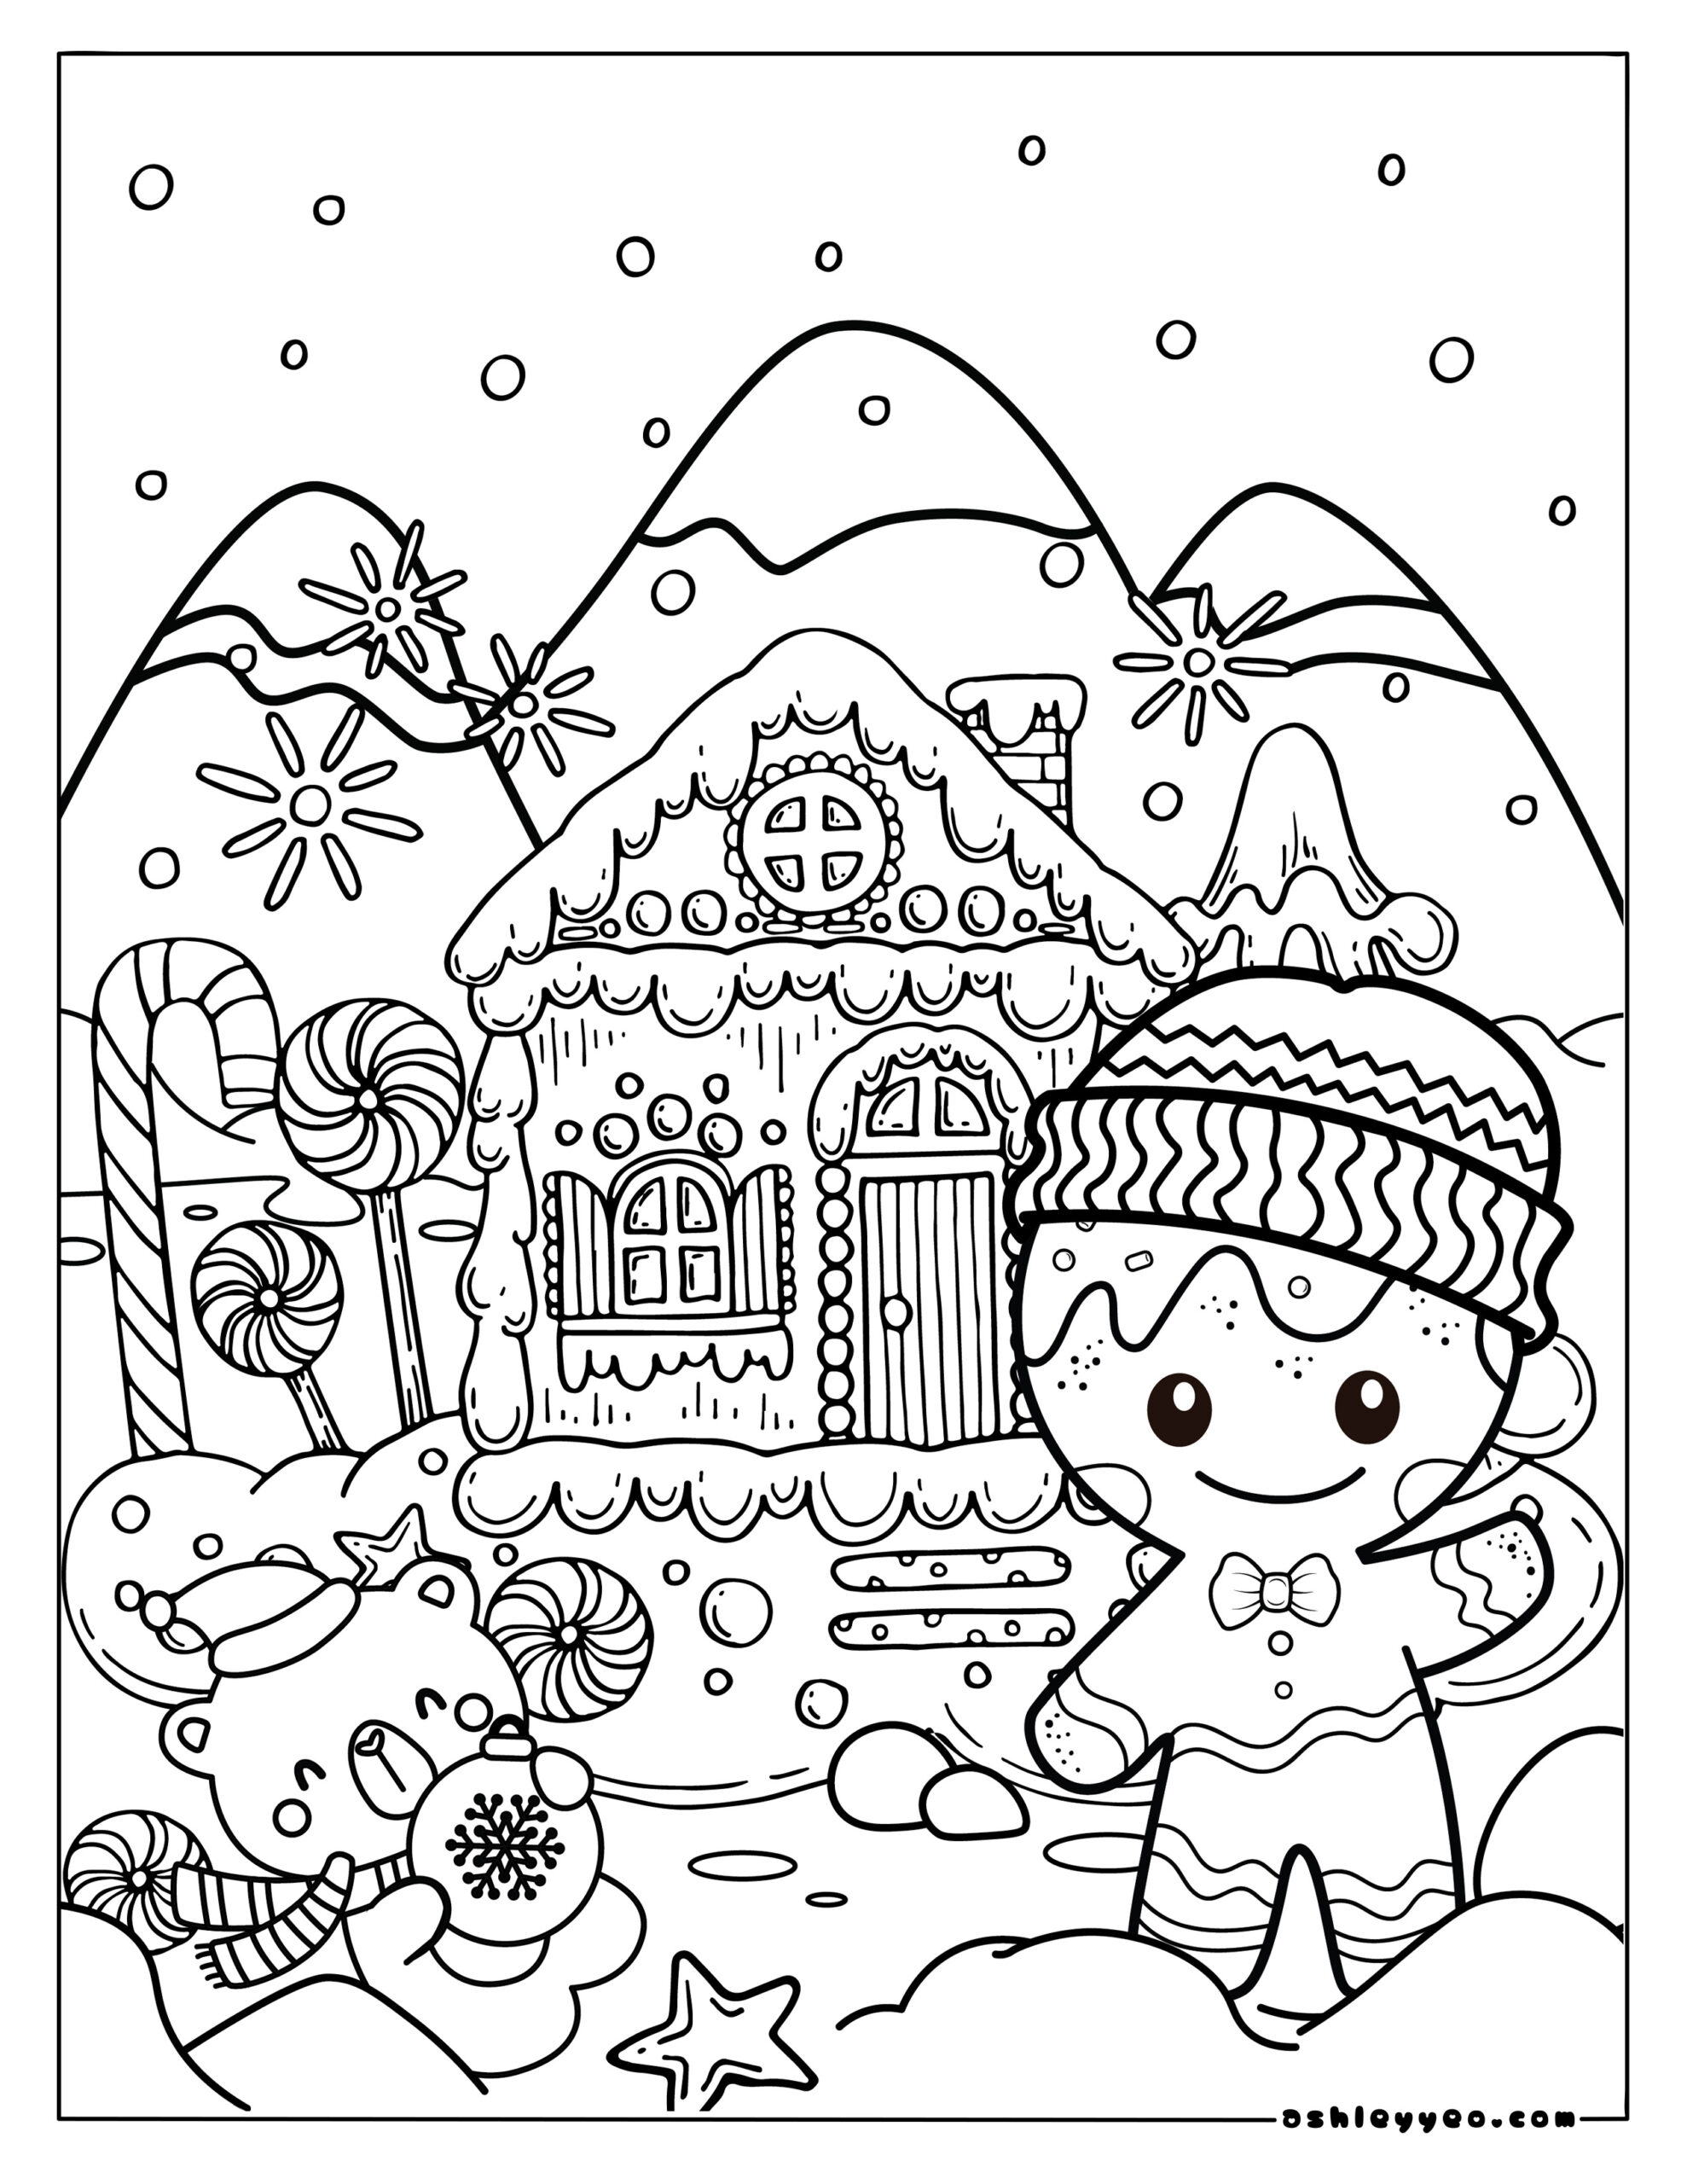 blood pressure coloring pages